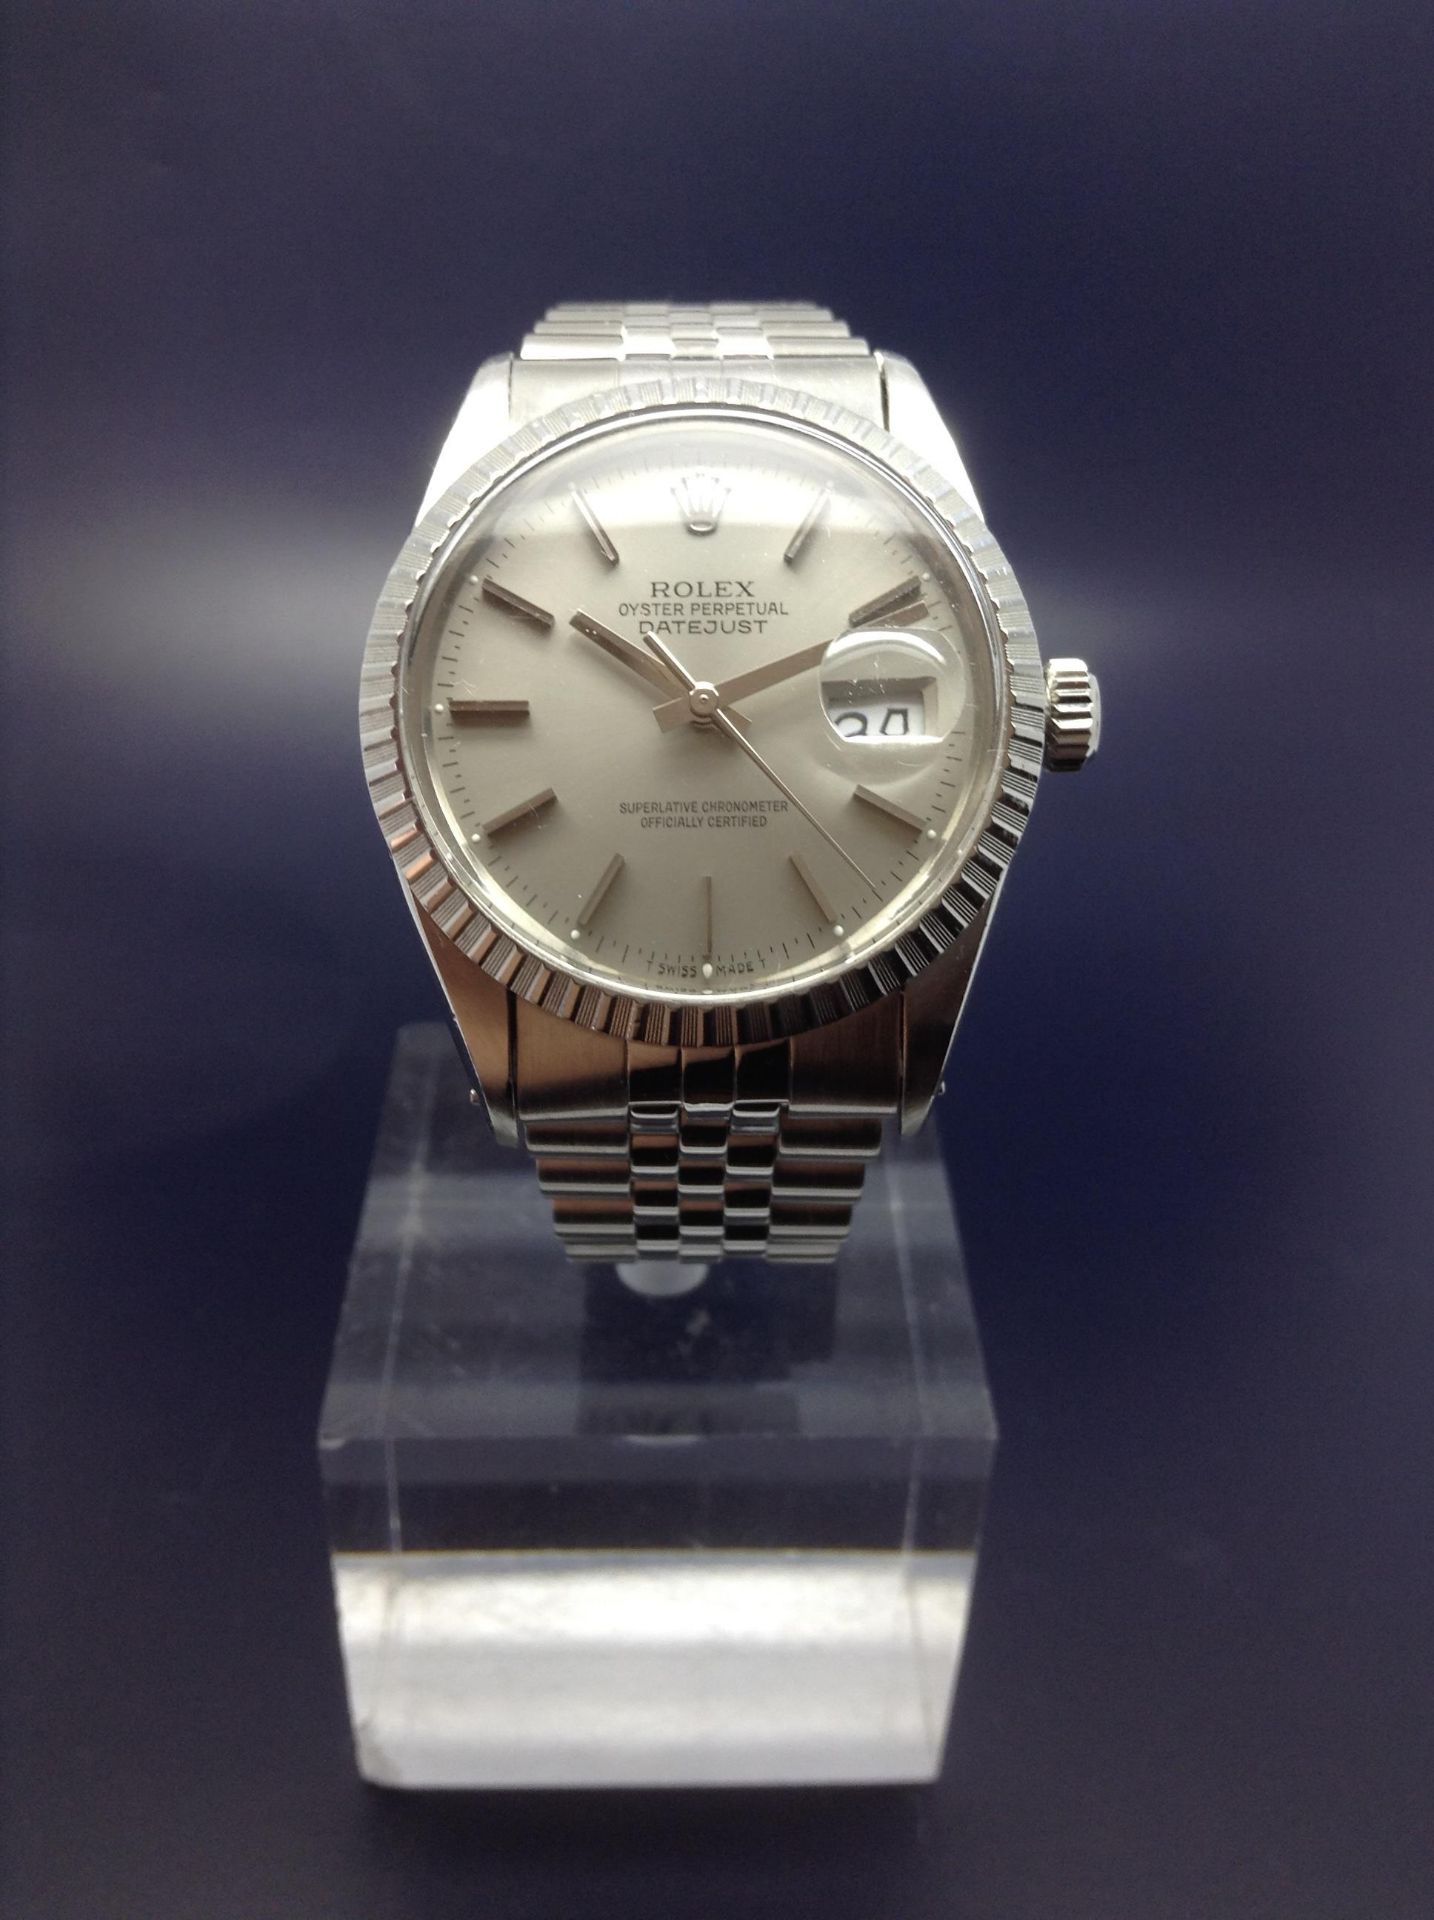 1986 ROLEX OYSTER DATE JUST PERPETUAL CHRONOMETER MODEL 16030 GENTS STAINLESS STEEL WRIST WATCH - Image 4 of 4